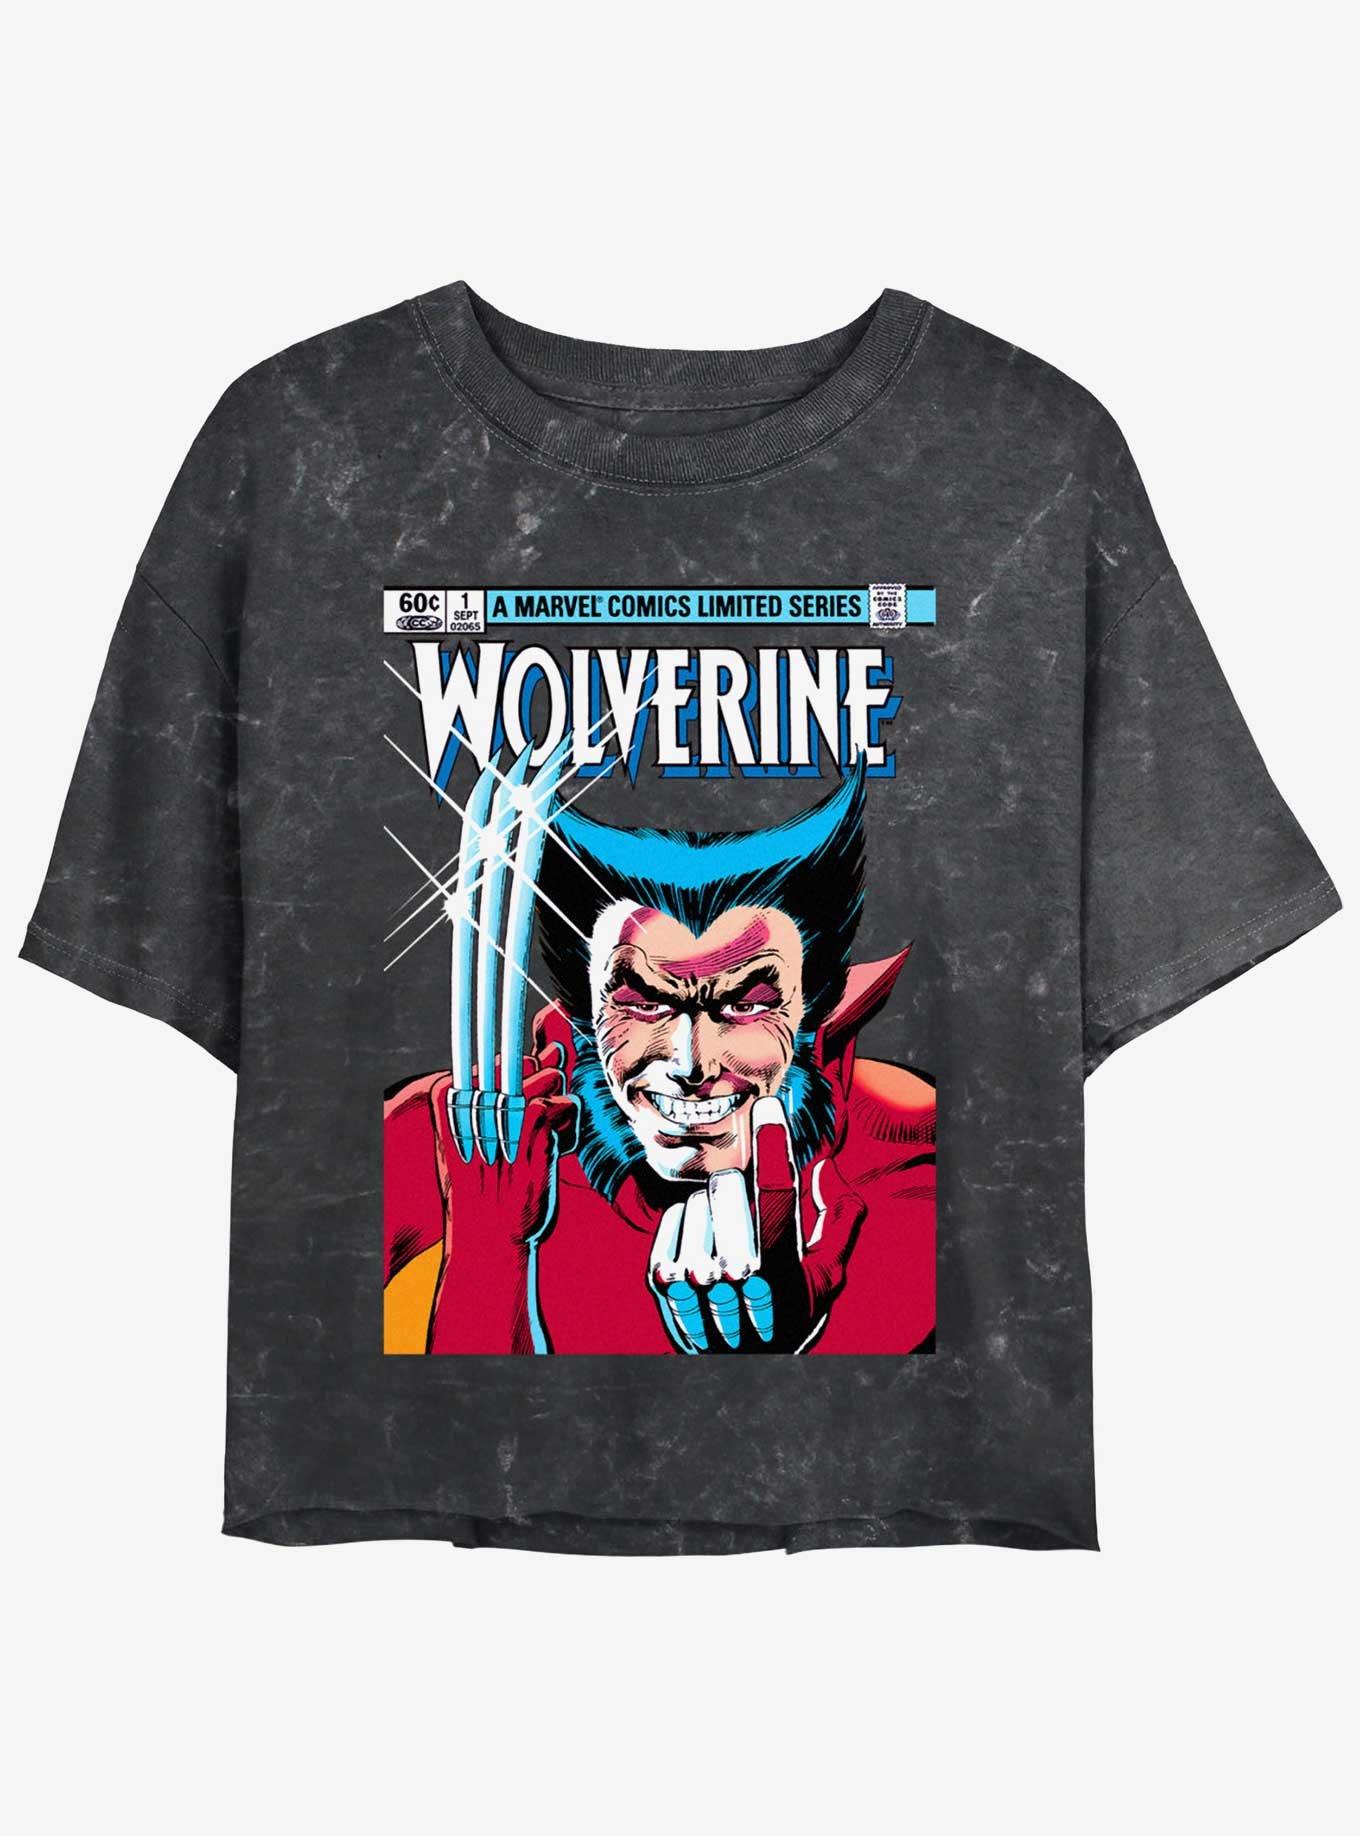 Wolverine 1st Issue Comic Cover Girls Mineral Wash Crop T-Shirt, BLACK, hi-res